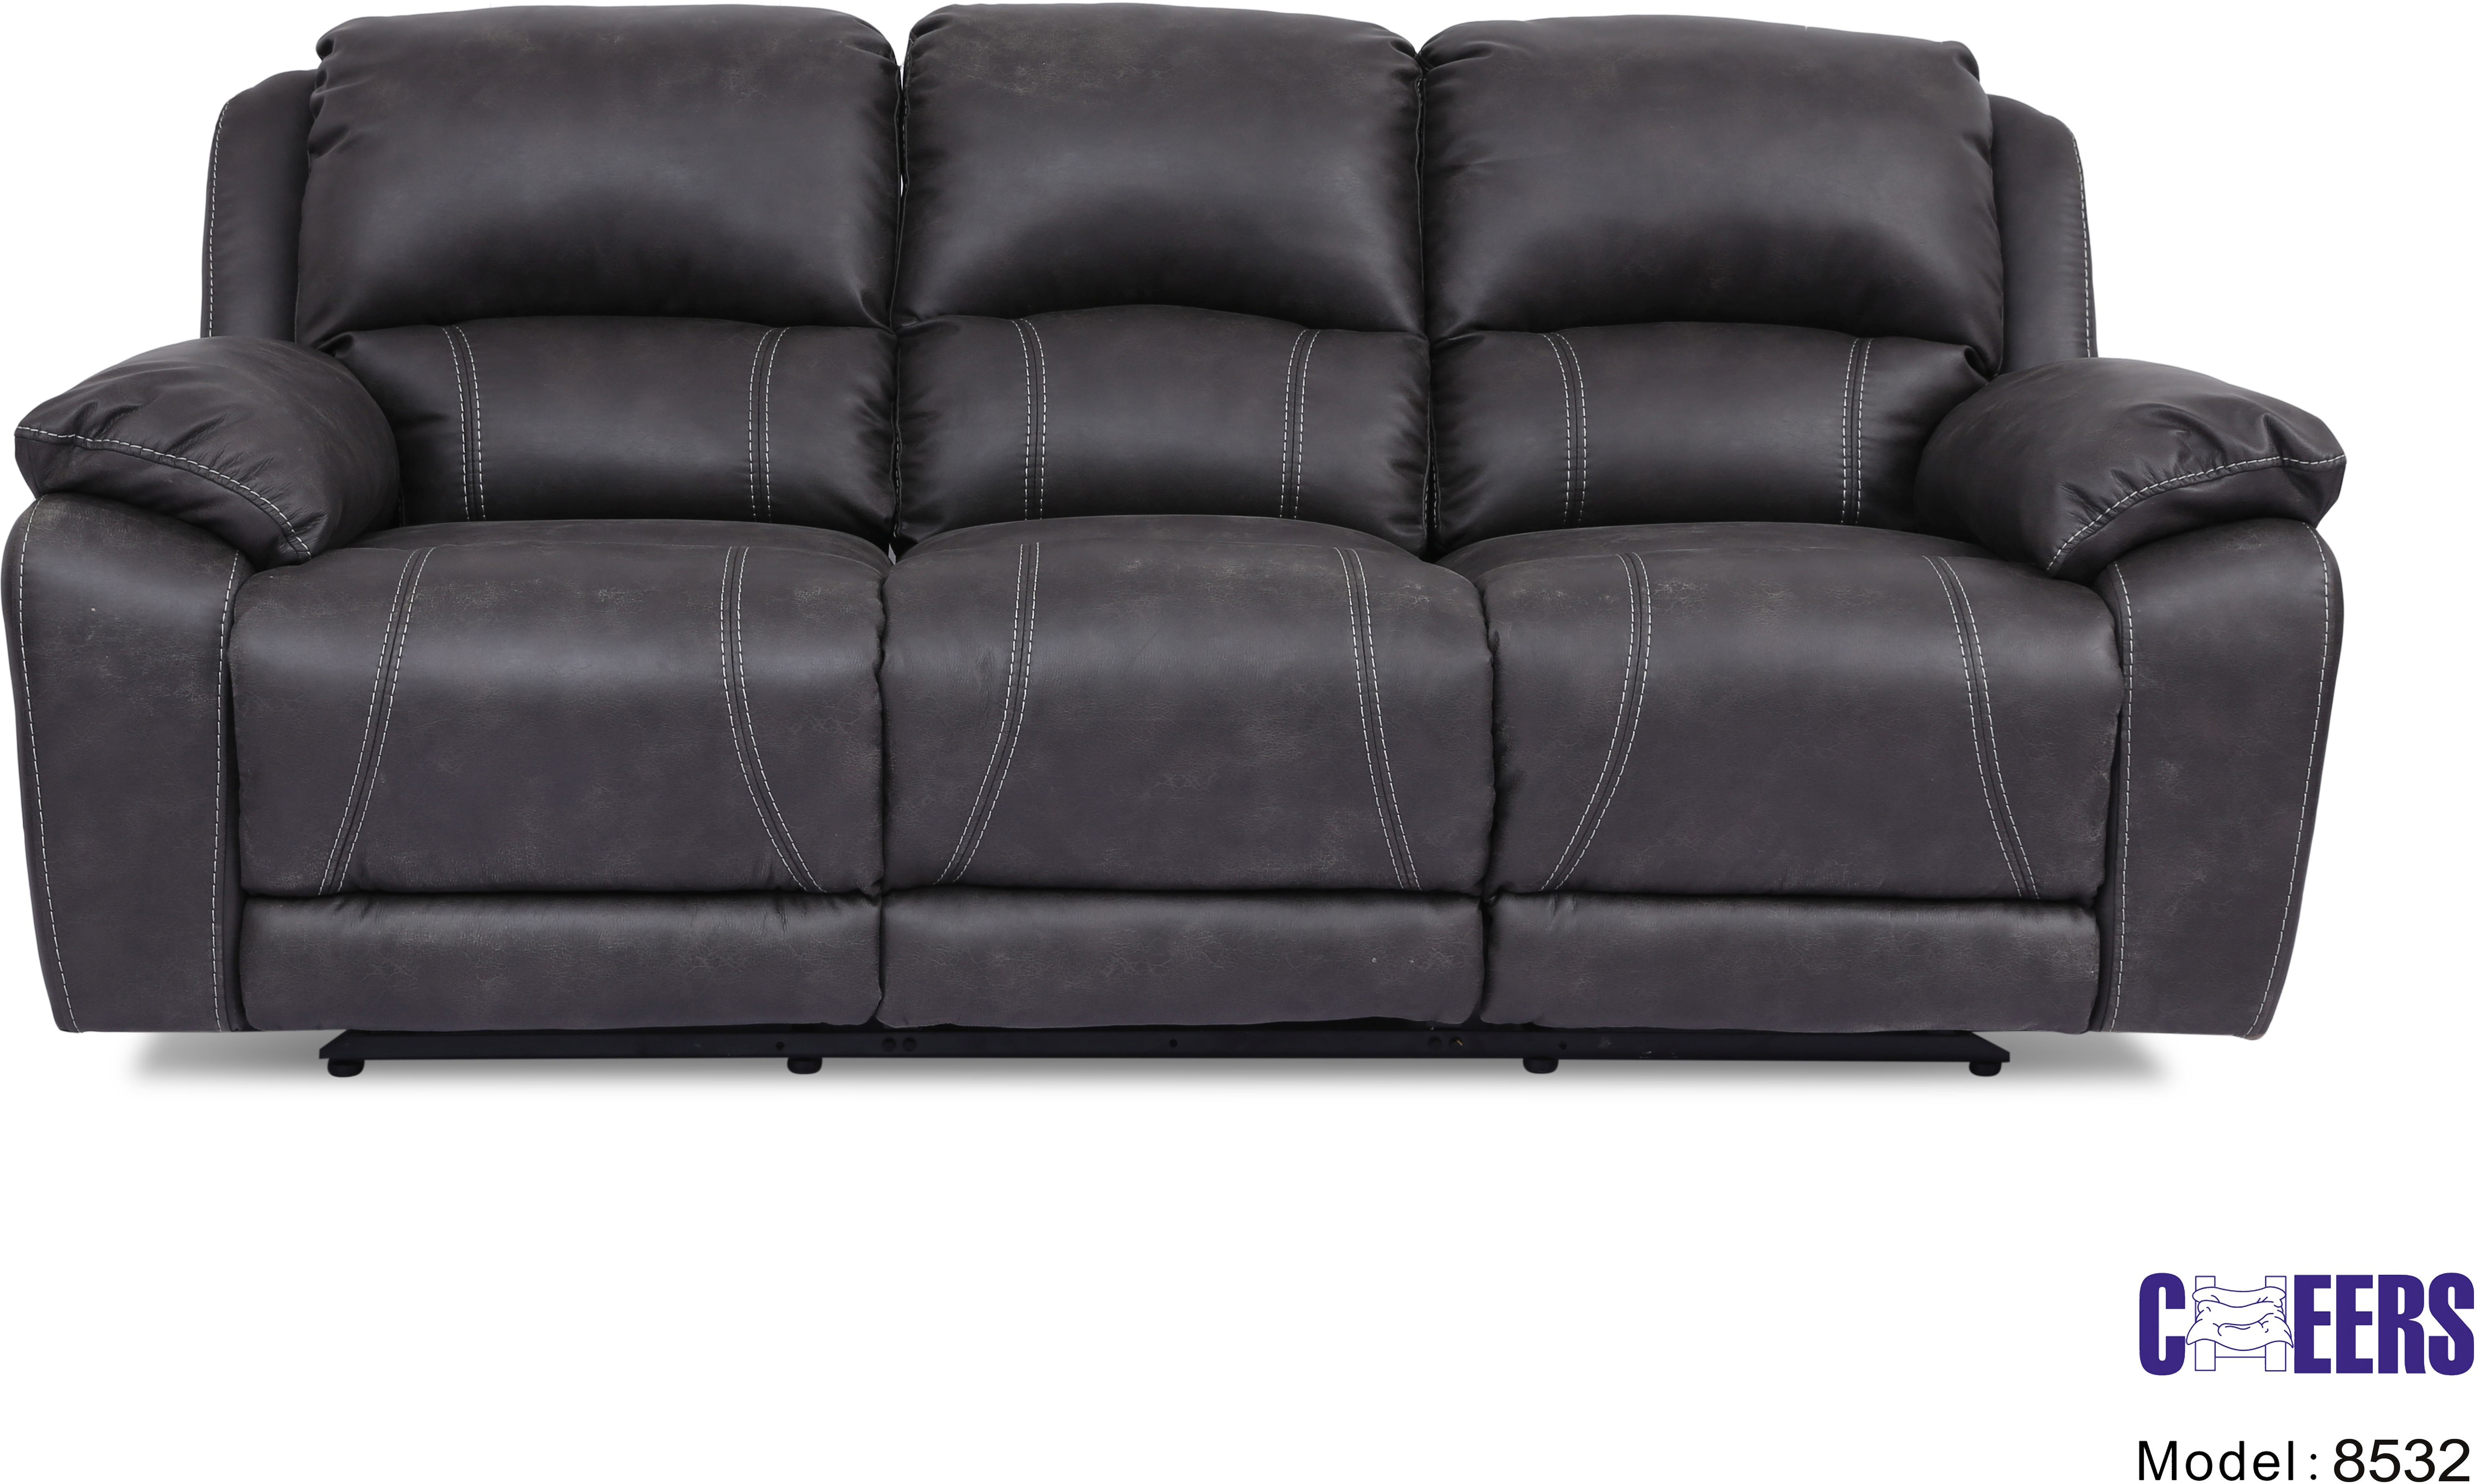 cafeteria mærkning Præfiks Giovanni Maximo Grey Reclining Sofa XW8532-L3-2M #25667C - Northern  Mattress and Furniture